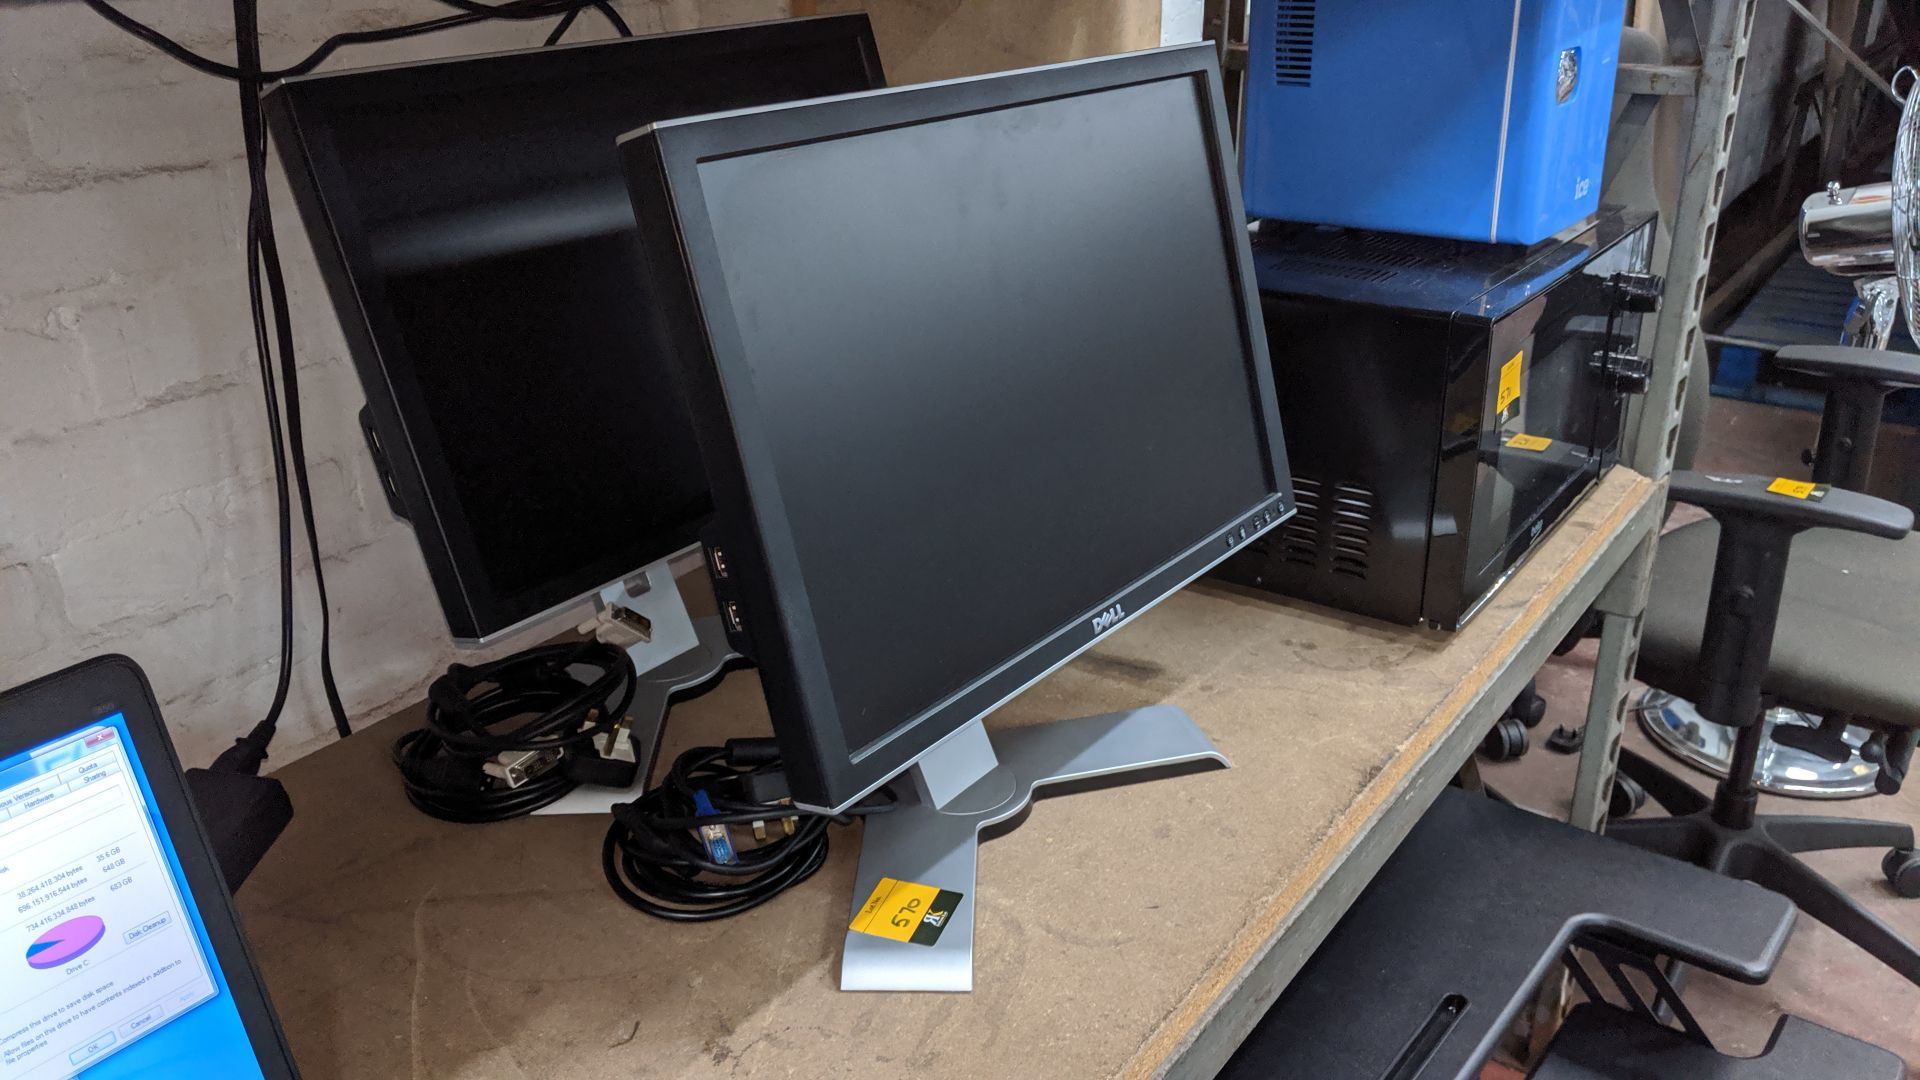 2 off Dell 20" widescreen monitors. Lots 560 - 580 form the total assets of a healthcare recruitment - Image 2 of 5